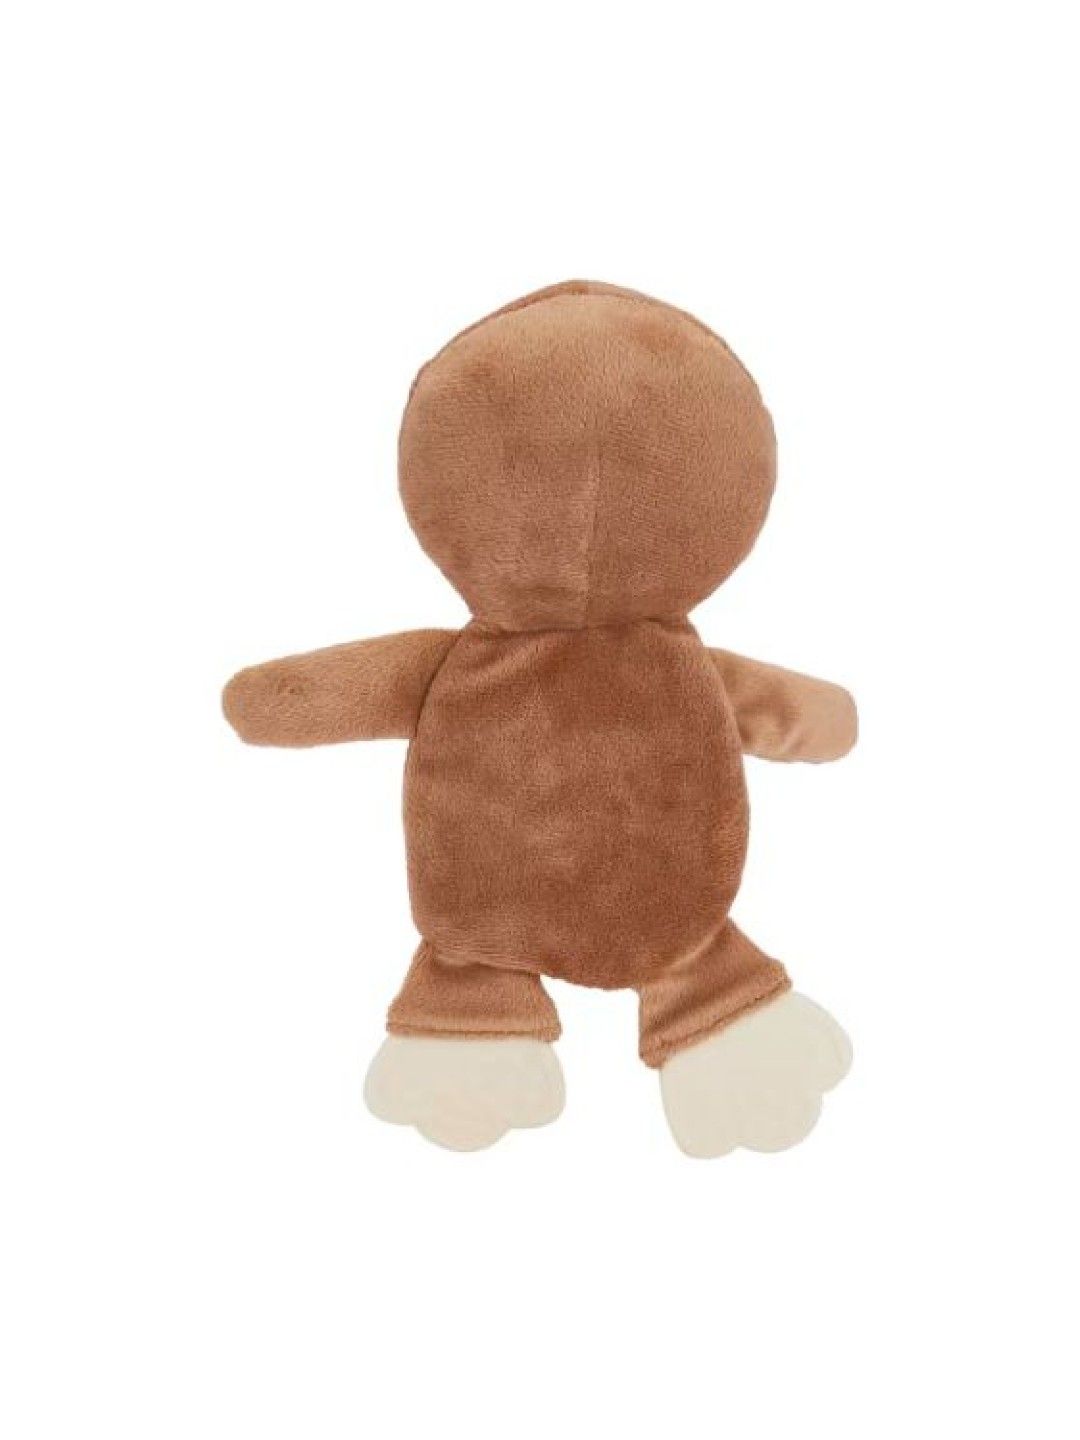 Anko Pet Toy Puppy Crinkle Sloth (Brown- Image 3)